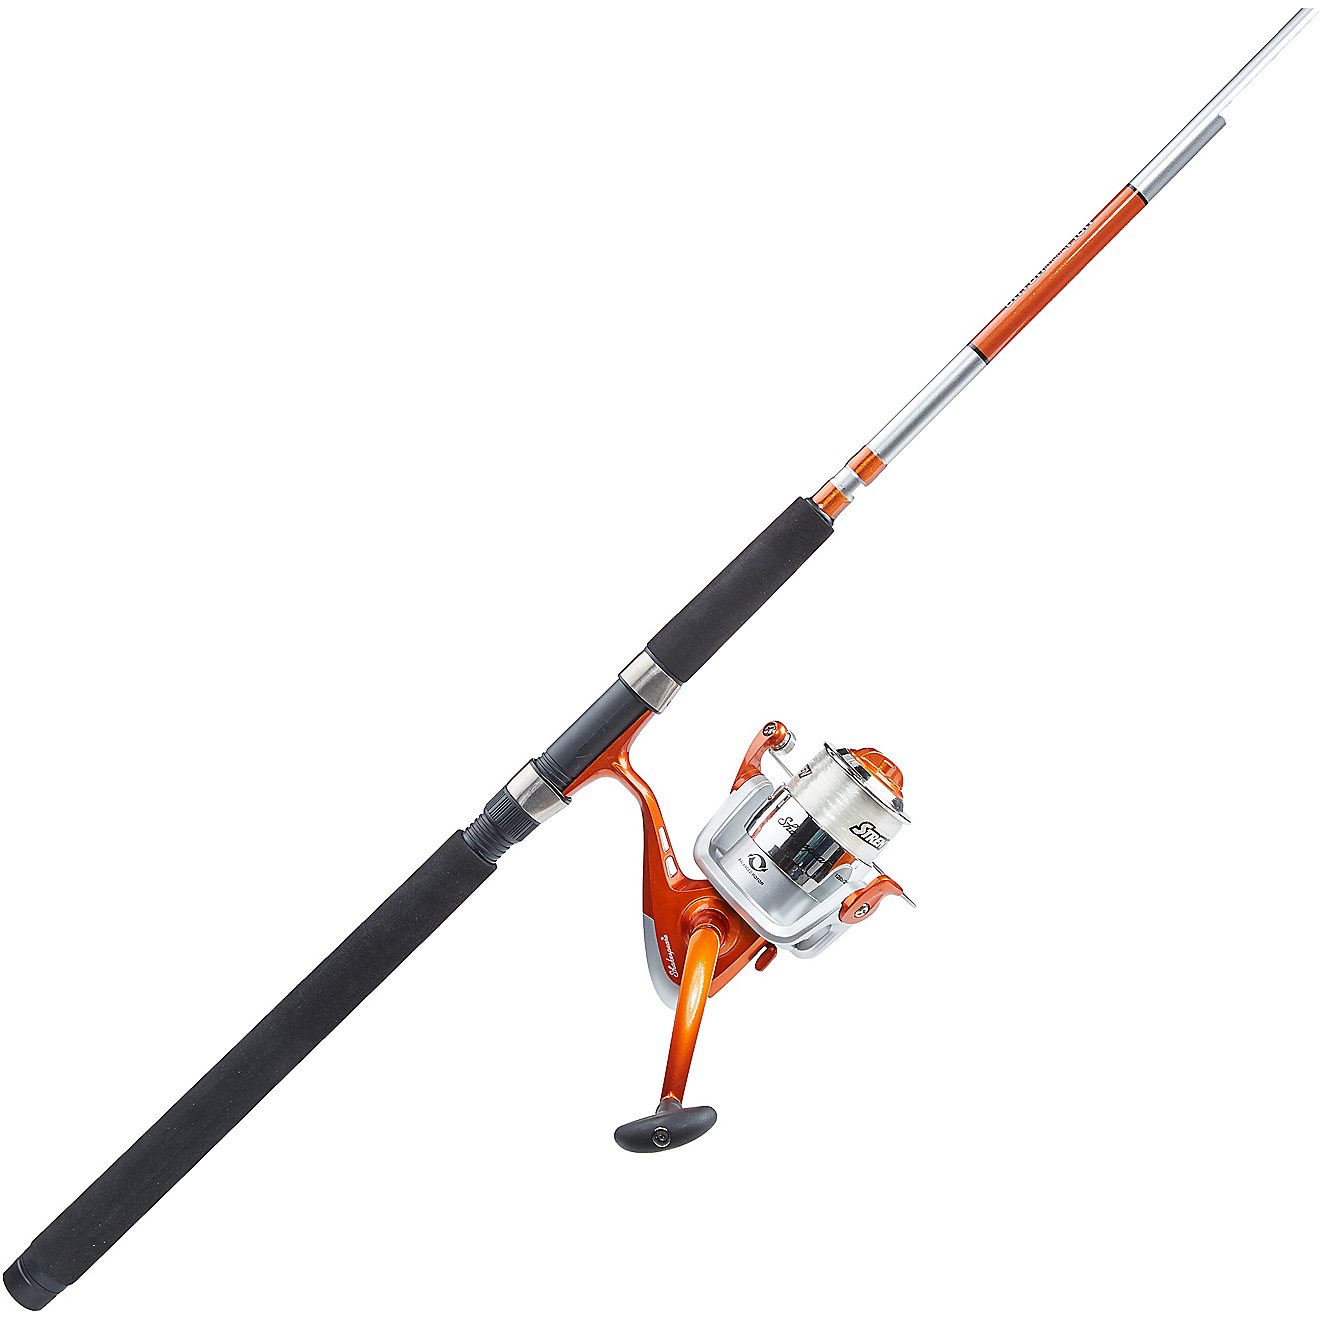 Shakespeare Catch More Fish 7 ft M Catfish Spinning Rod and Reel Combo Kit